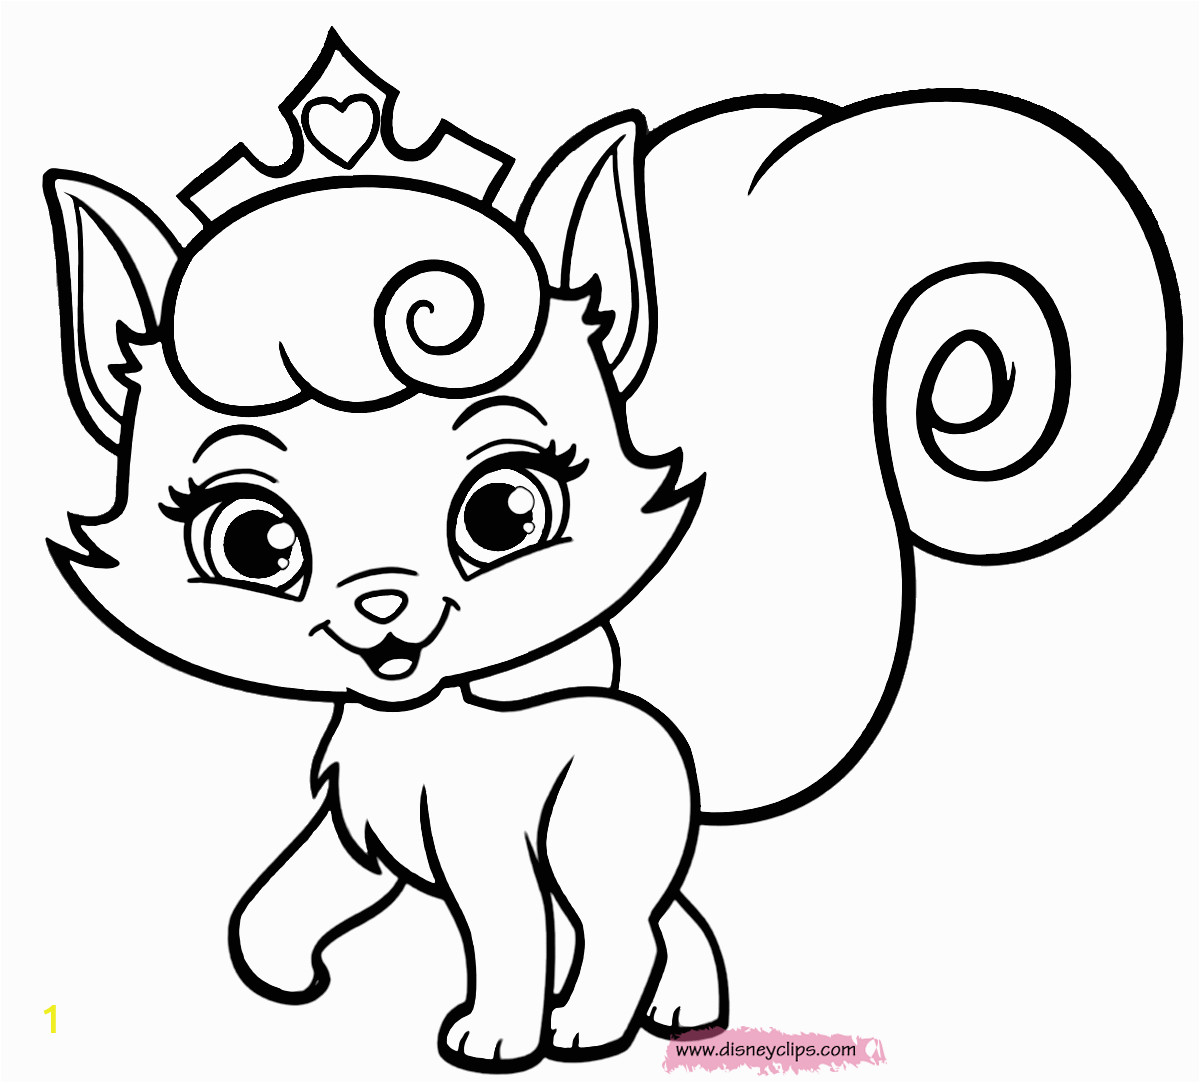 Free Coloring Pages Of Puppies and Kittens Kitten and Puppy Coloring Pages to Print Coloring Home